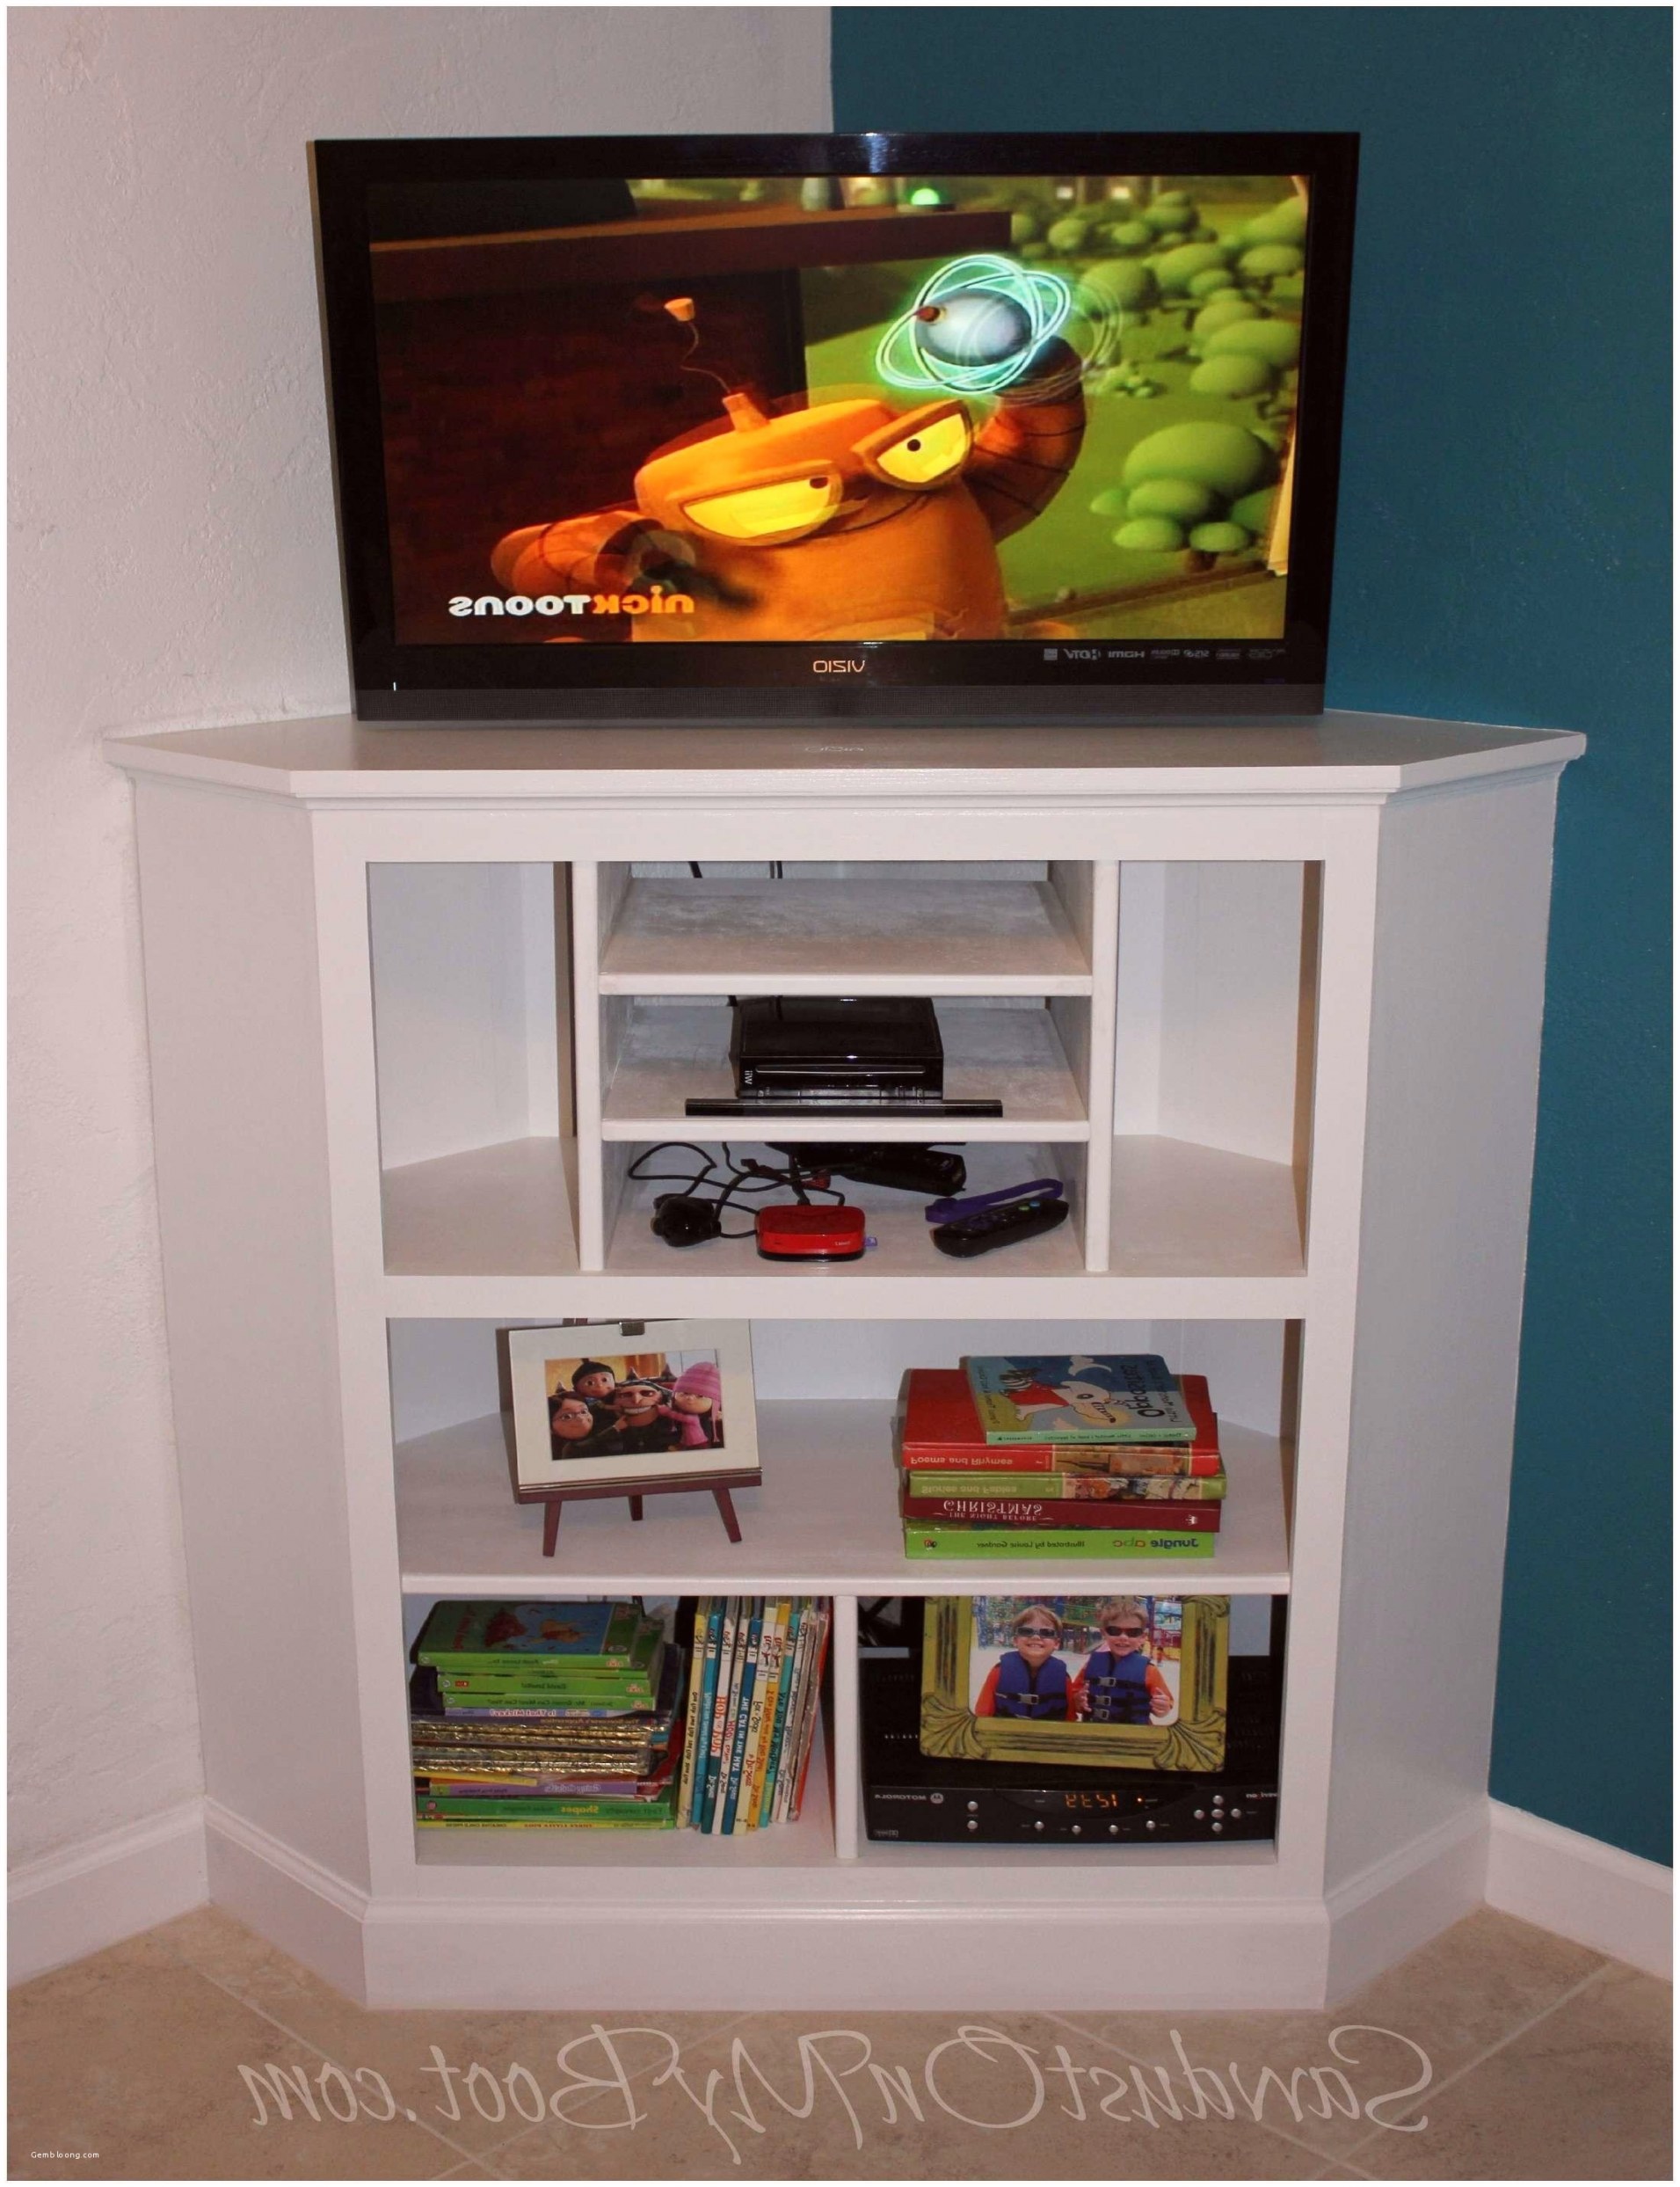 50 Tv Stand with Fireplace Inspirational Corner Fireplace Designs 79 Best Living Room with Fireplace